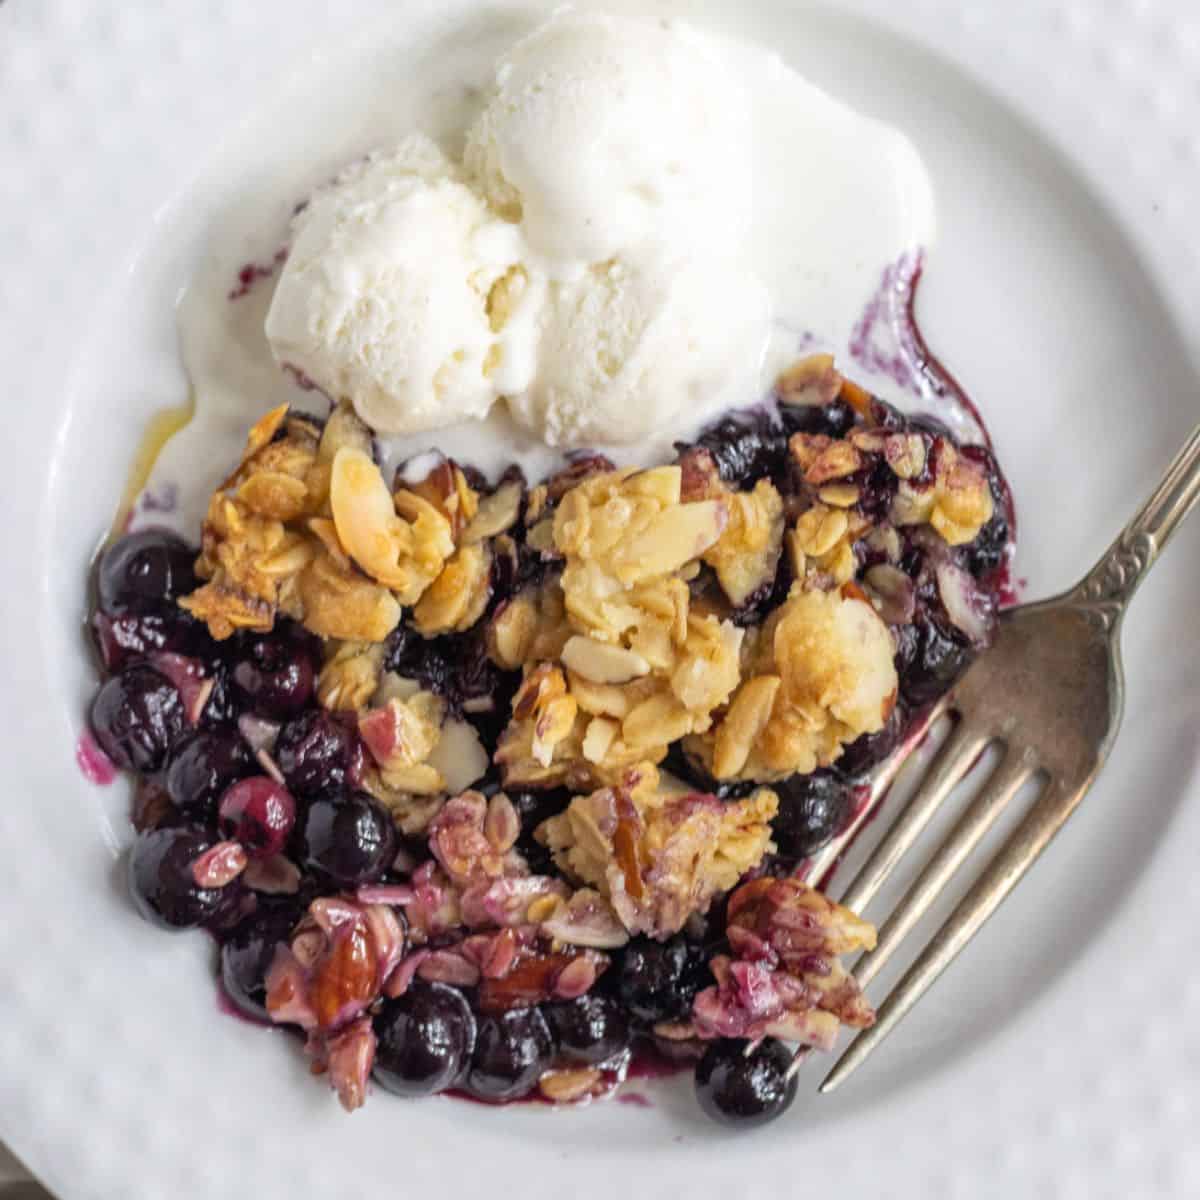 Blueberry Oat and Almond Crisp